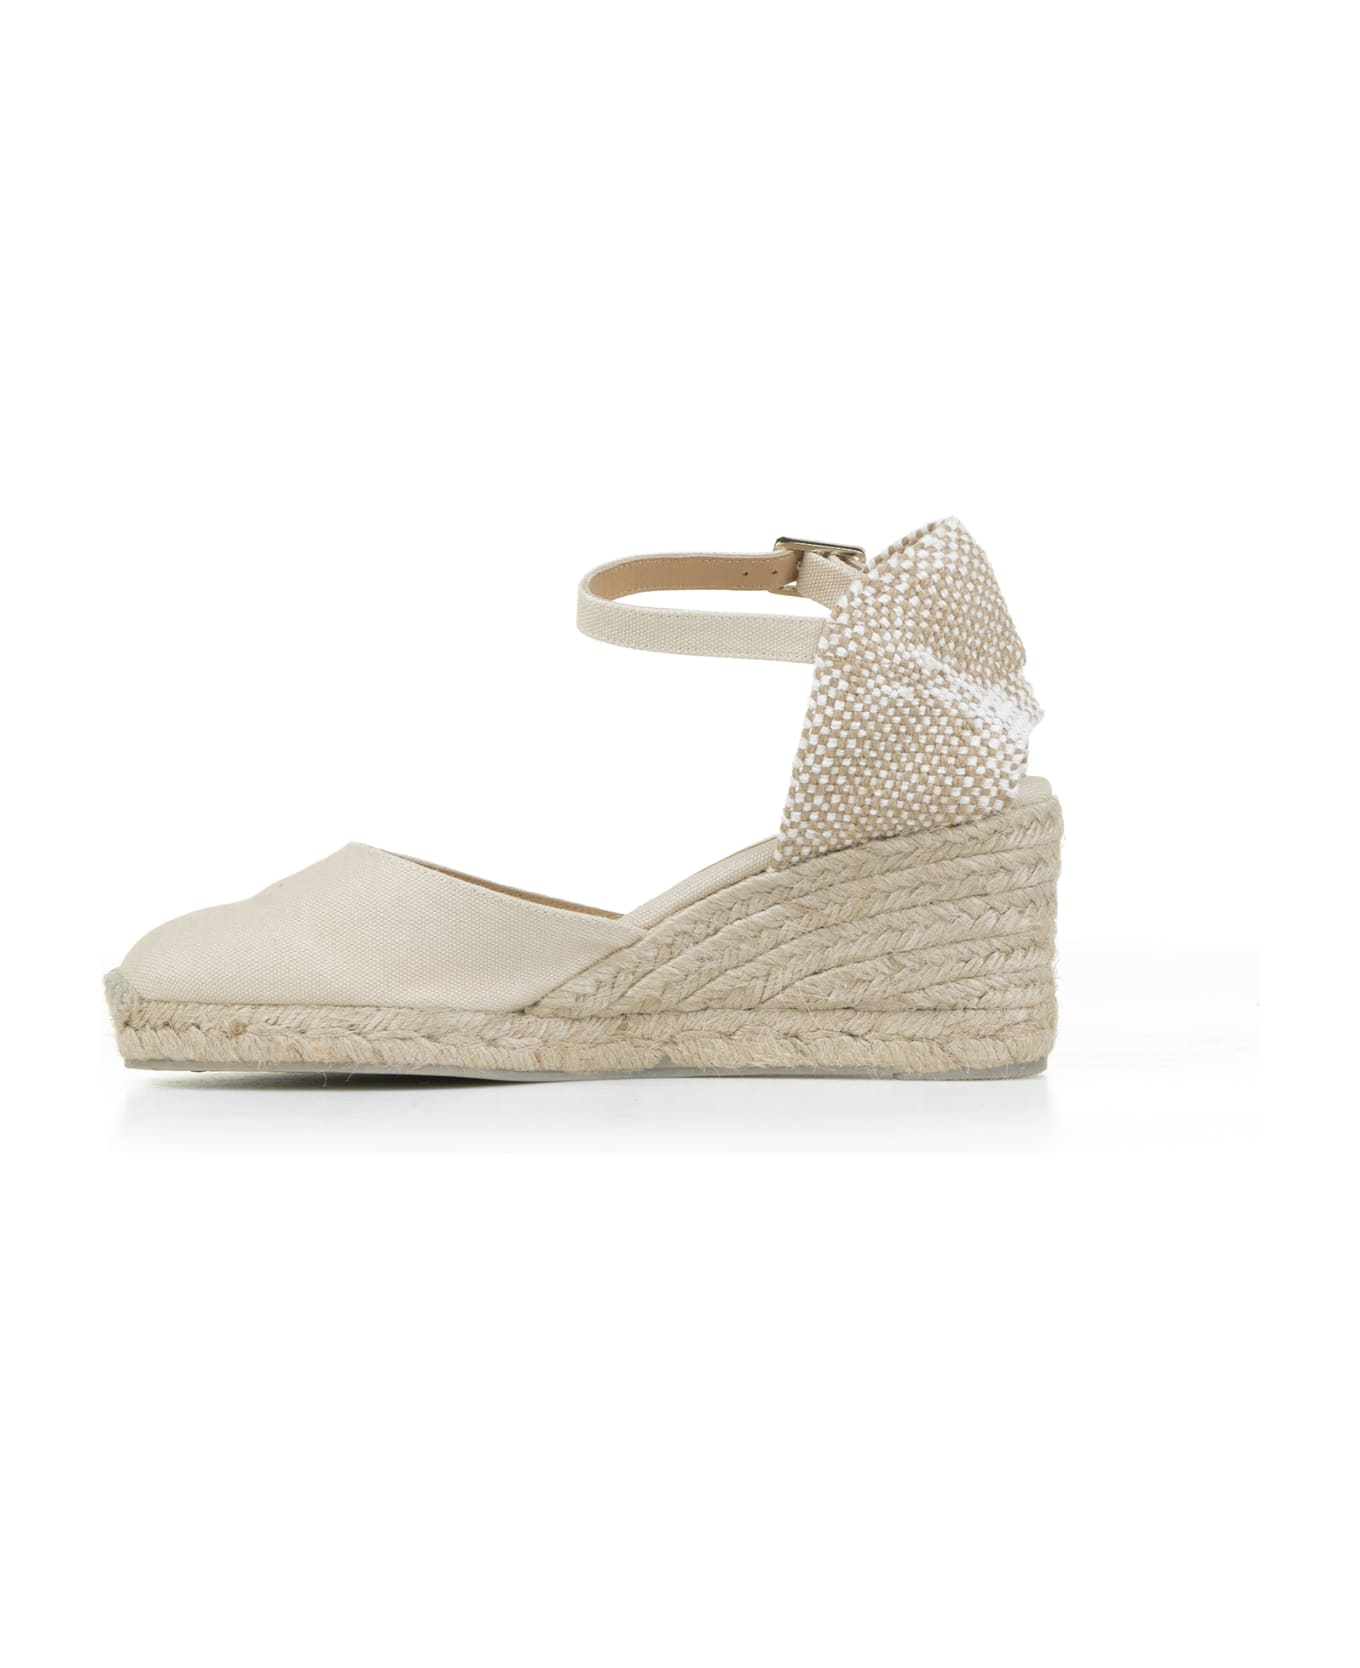 Castañer Carol Espadrilles In Canvas With Wedge - IVORY